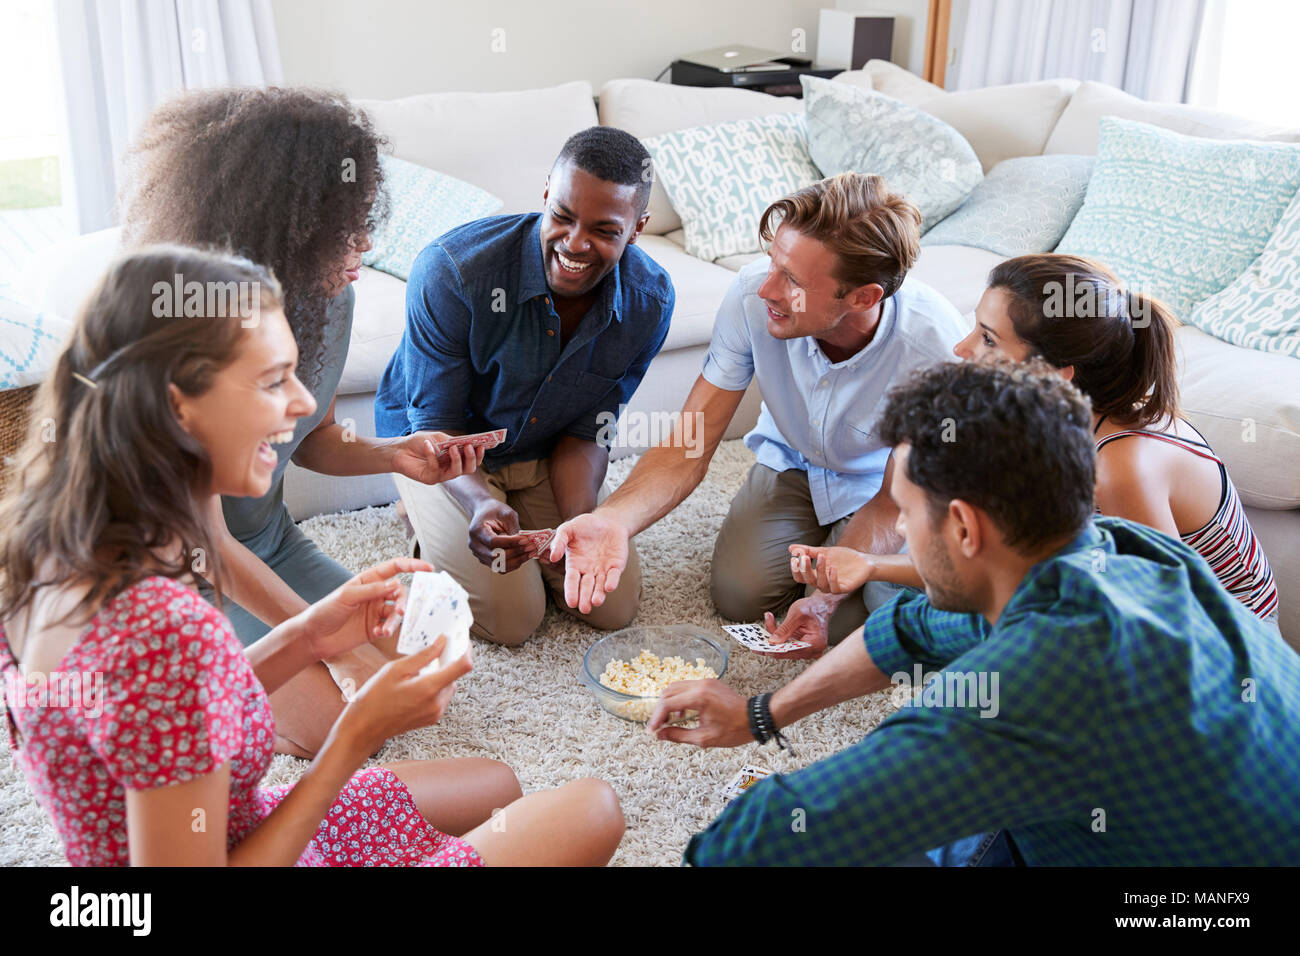 Group Of Friends At Home Playing Cards Together Stock Photo